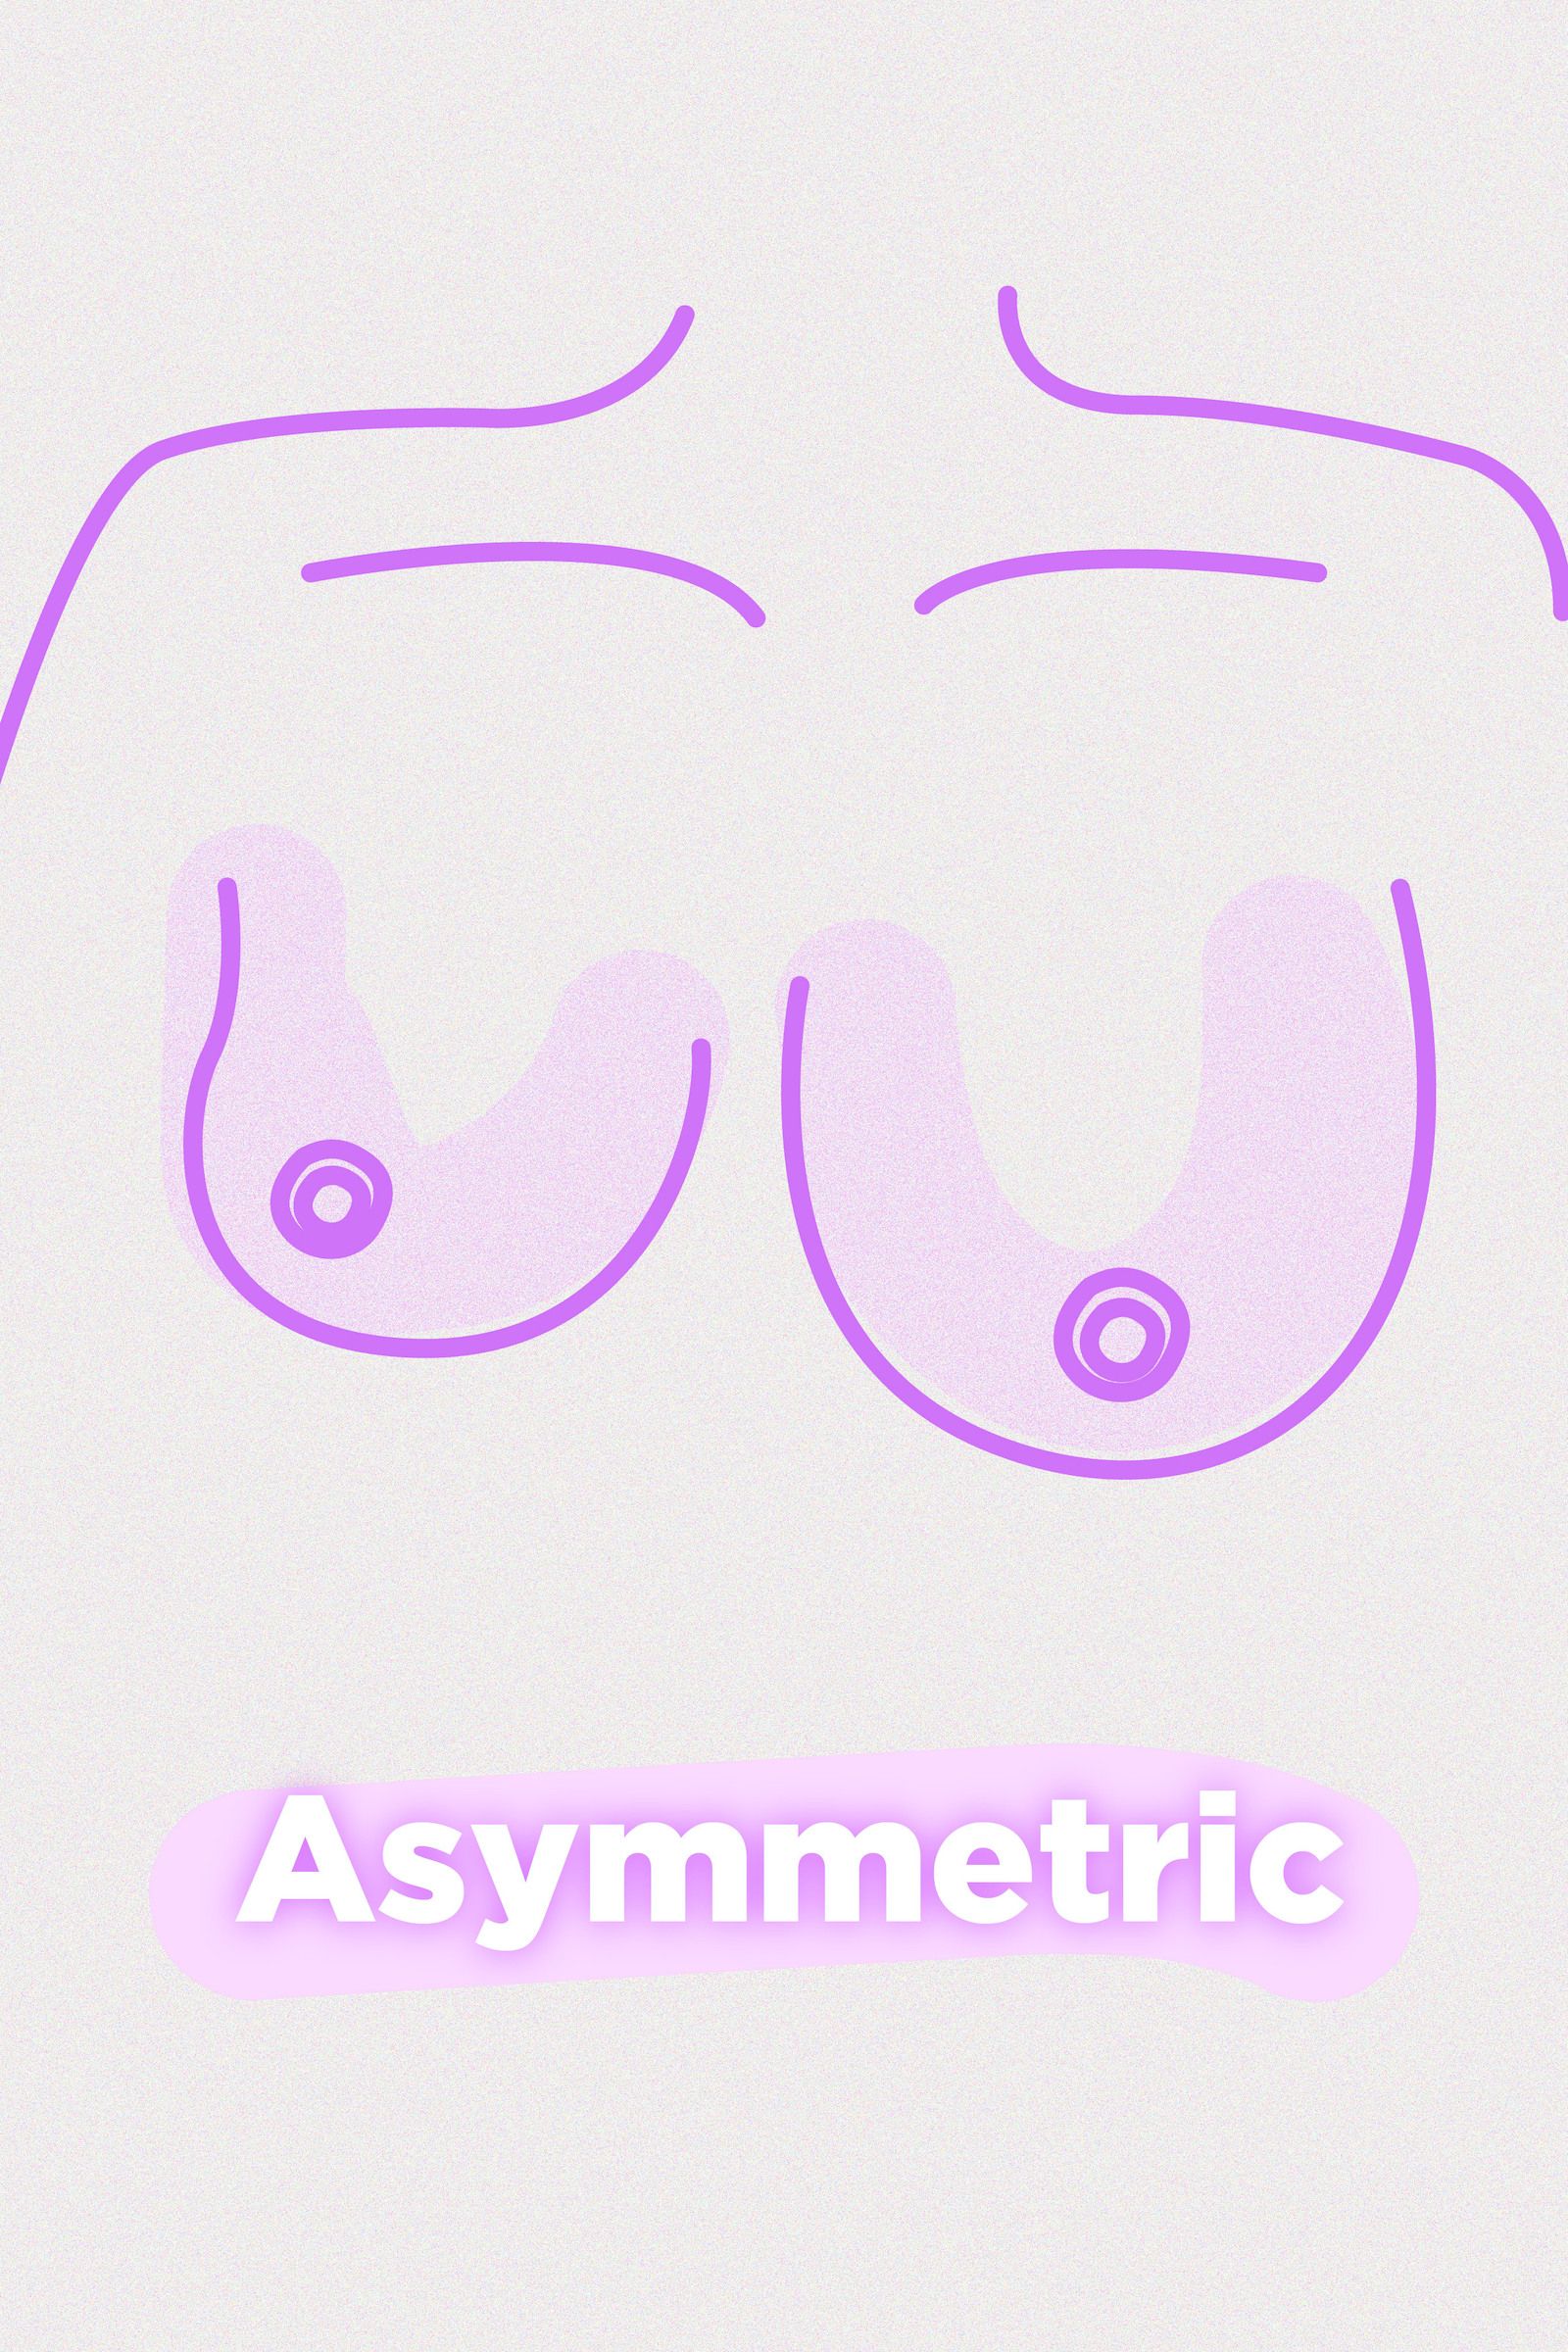 8 Types of Boobs in the World - Different Breast Sizes and Shapes